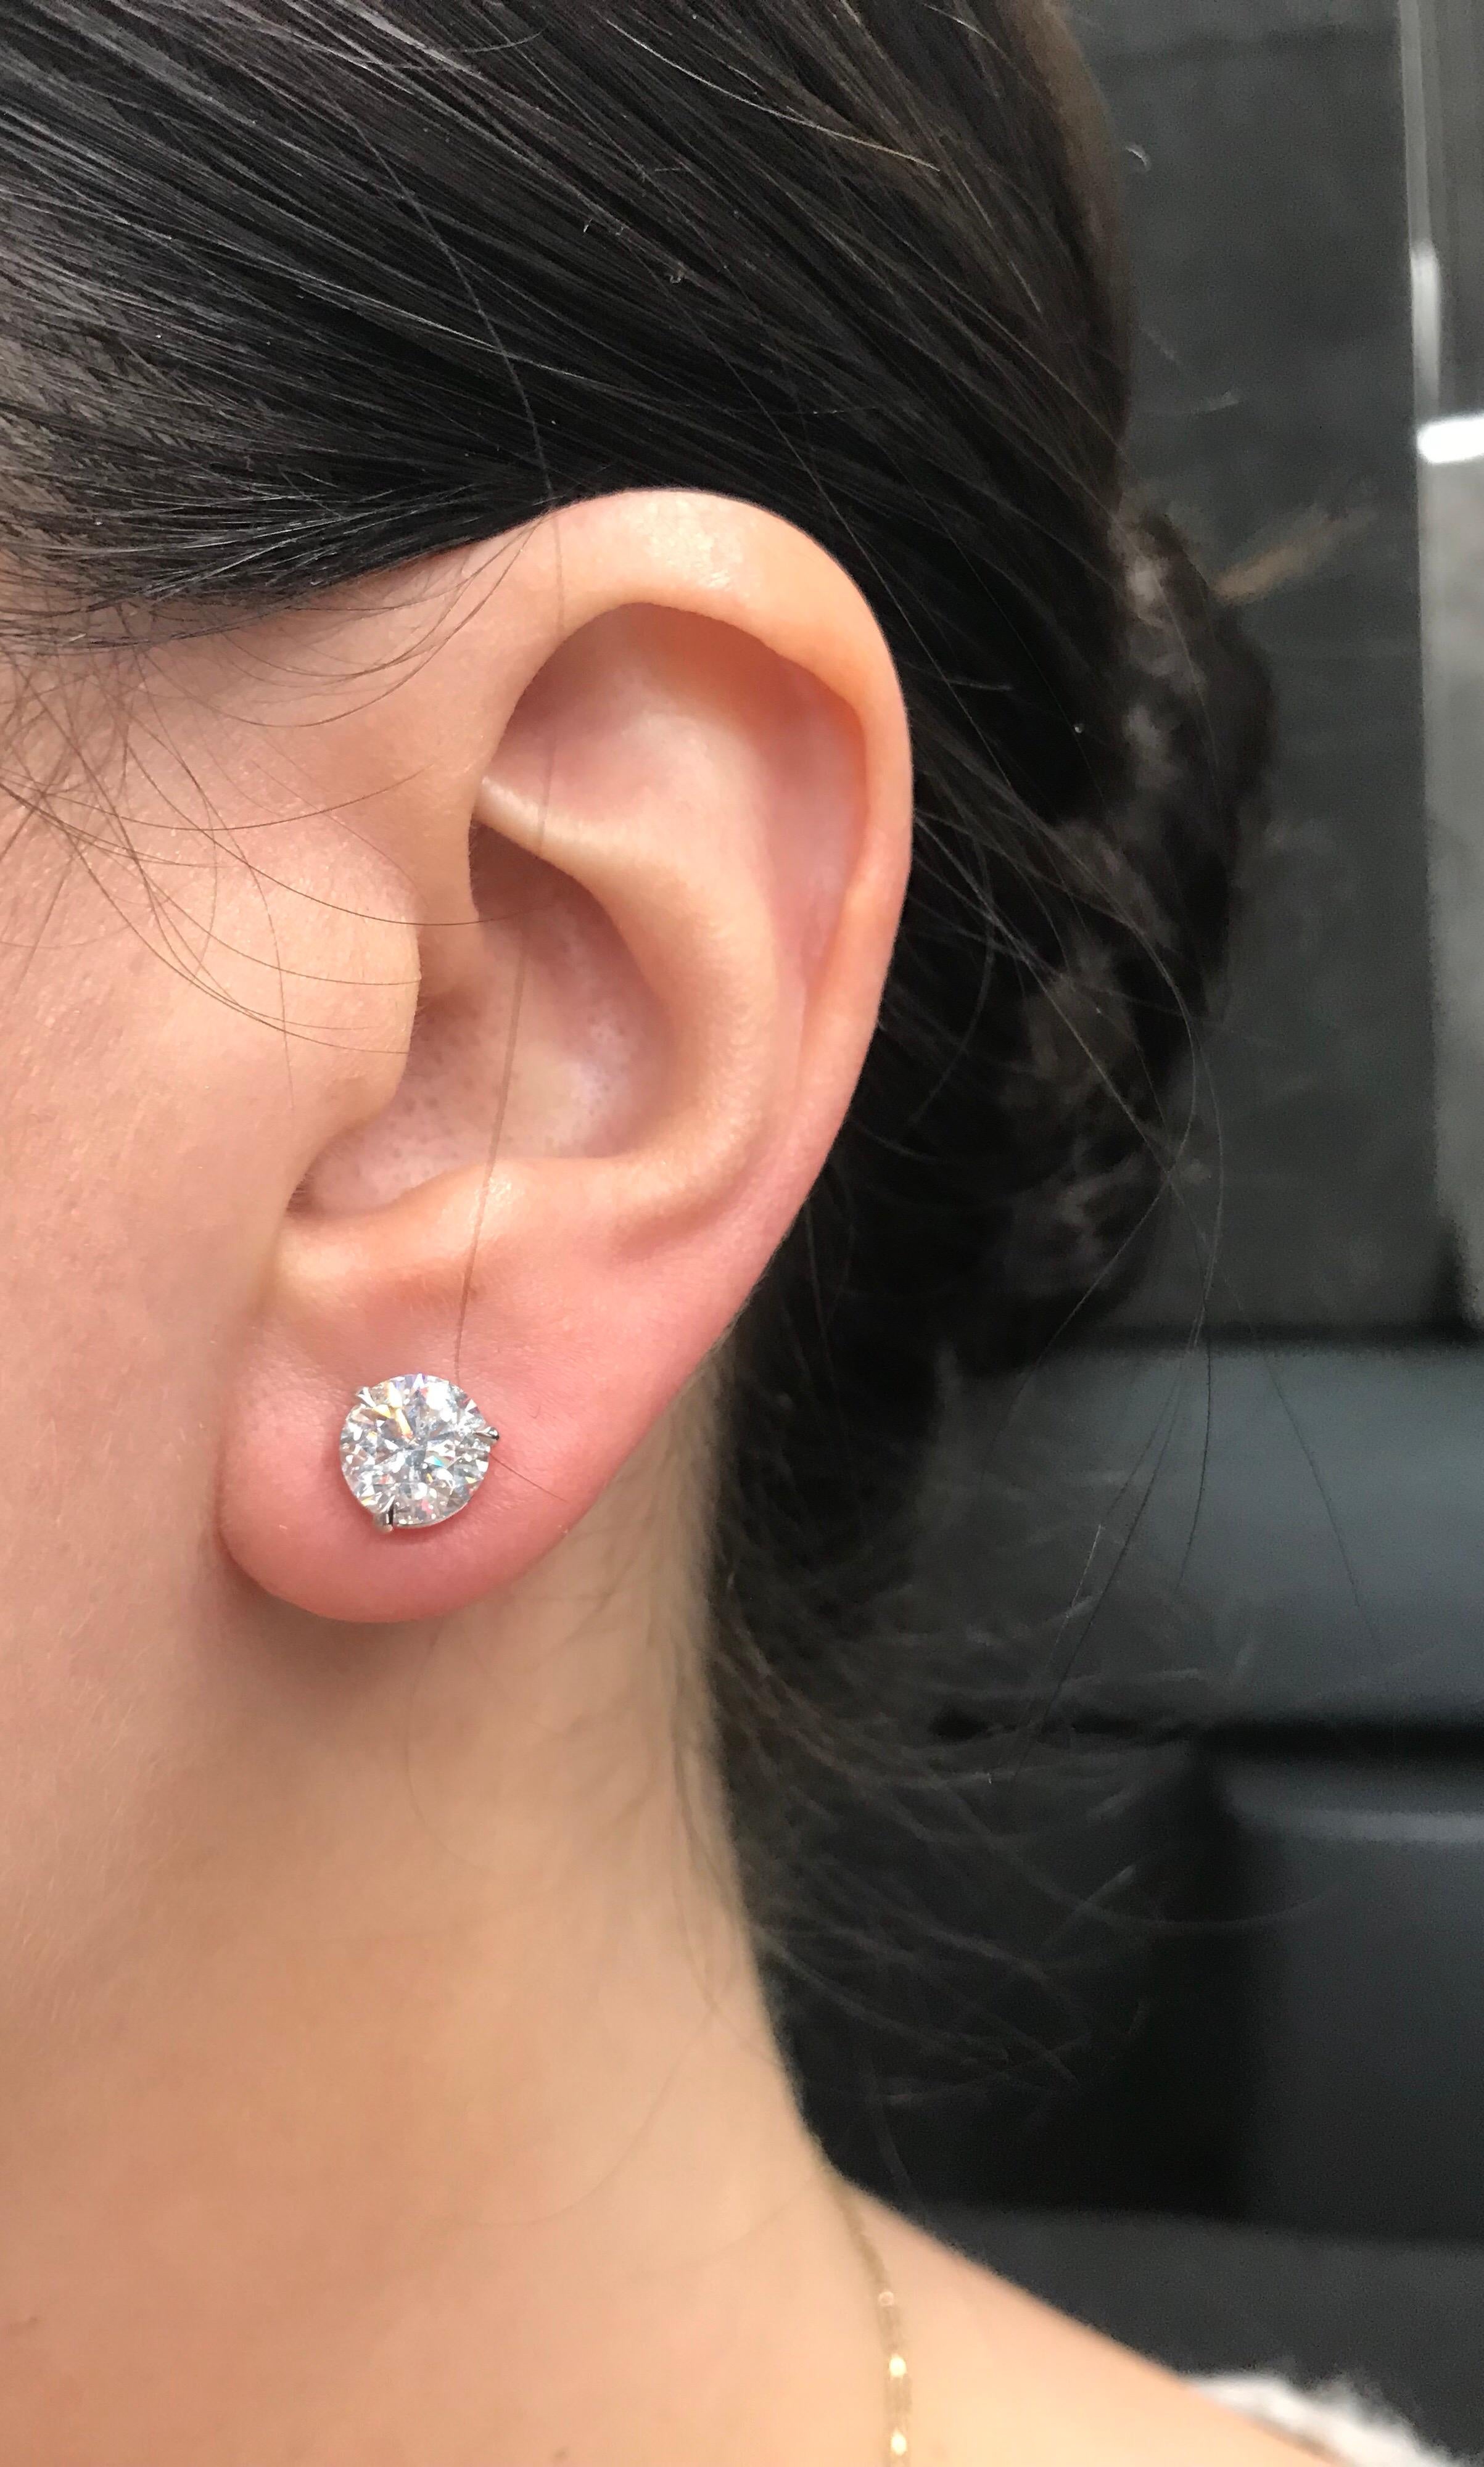 Diamond stud earrings weighing 3.14 carats in a three prong champagne setting, in 18k white gold. 
Color: G-H
Clarity: I1
Our champagne setting is sold exclusively at Harbor Diamonds and sits closer to the ear than a martini setting. 